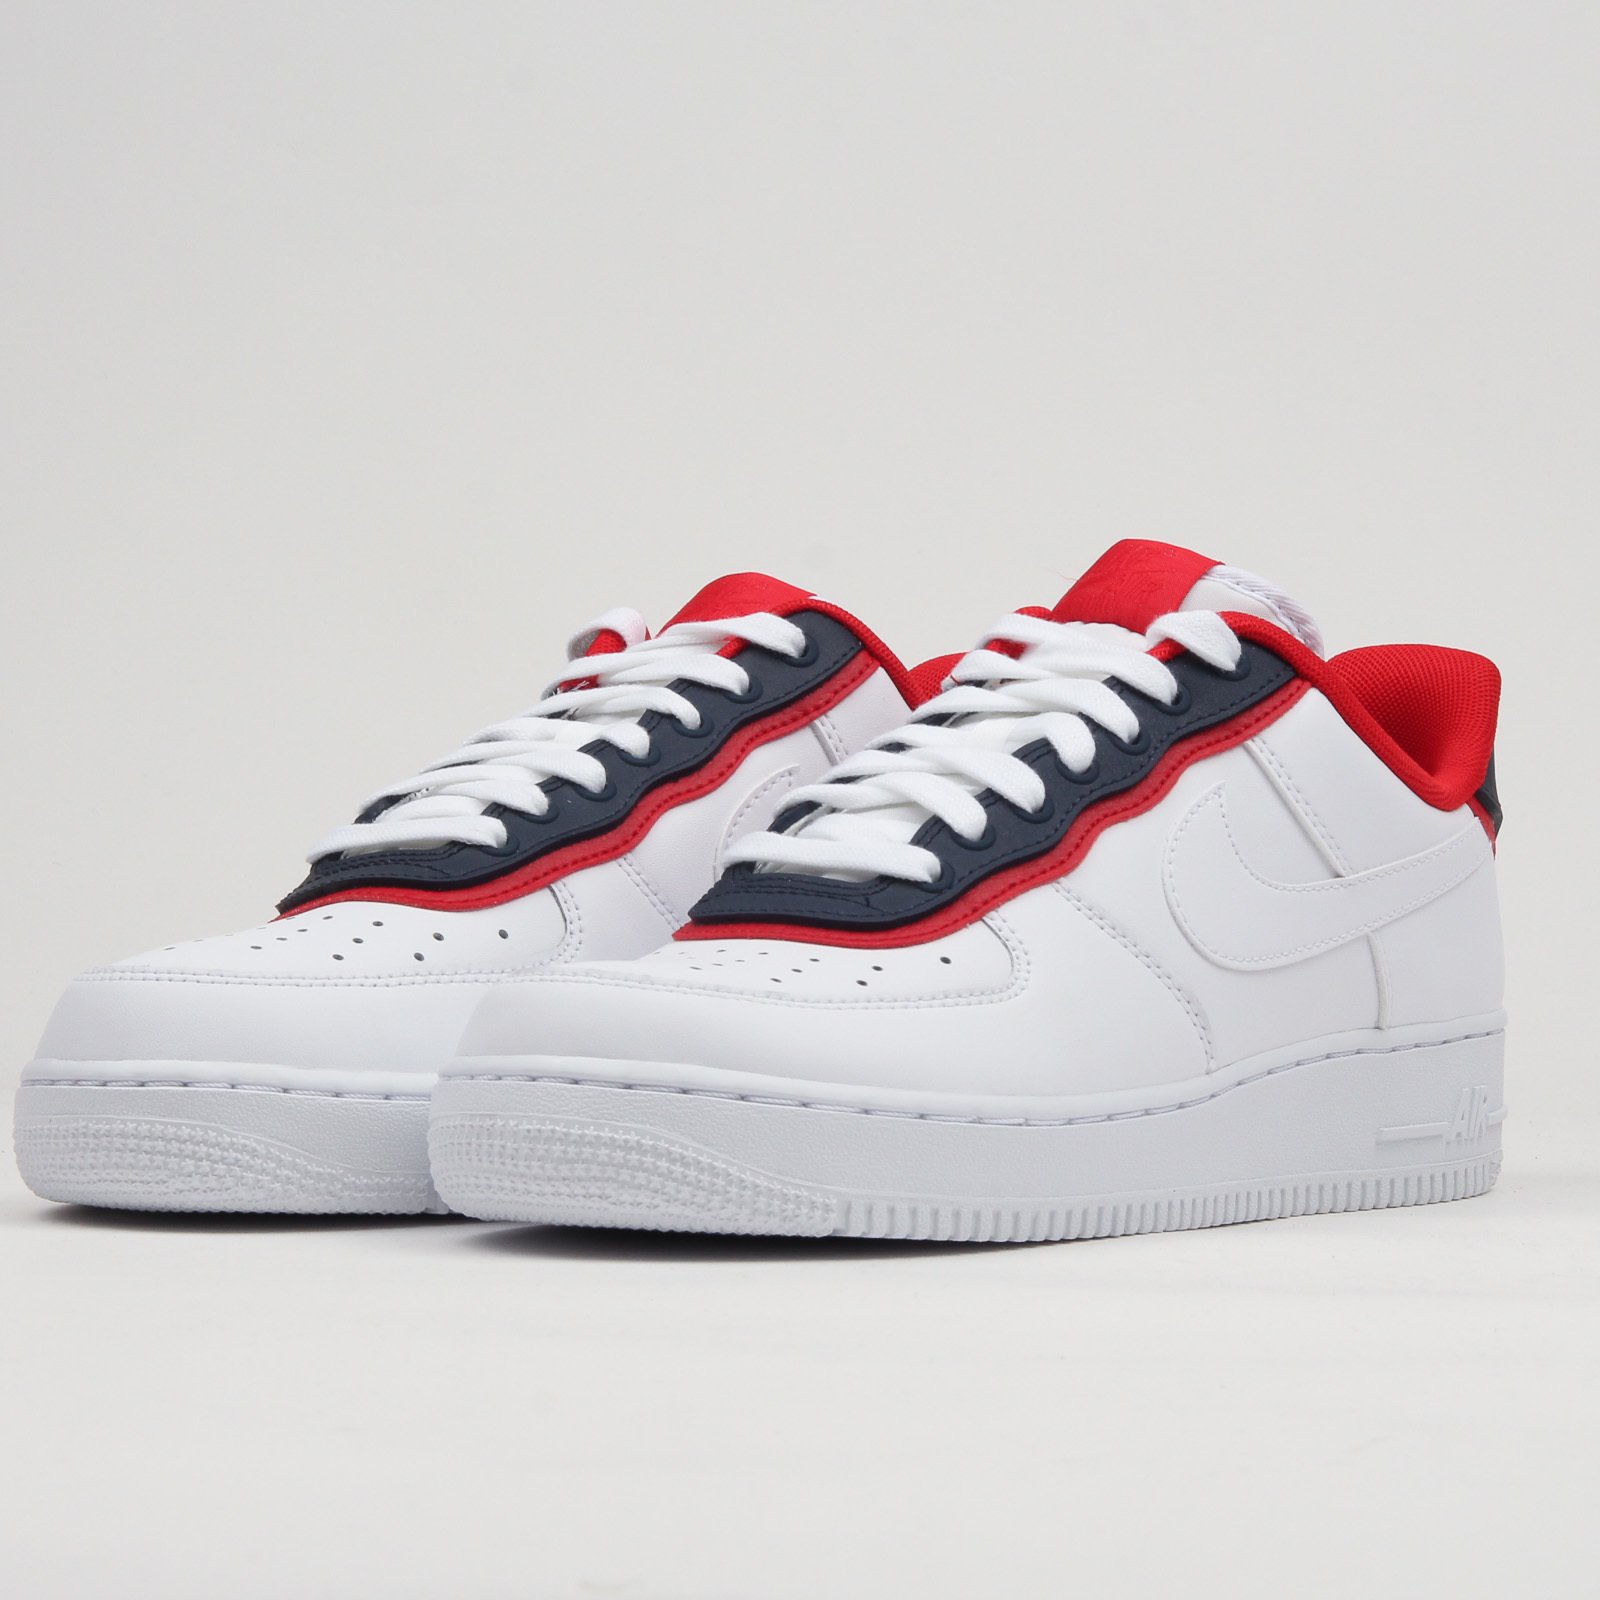 Nike Air Force 1 '07 LV8 Double Layer Mens Size 10 AO2439-100 Obsidian/Red  Shoes